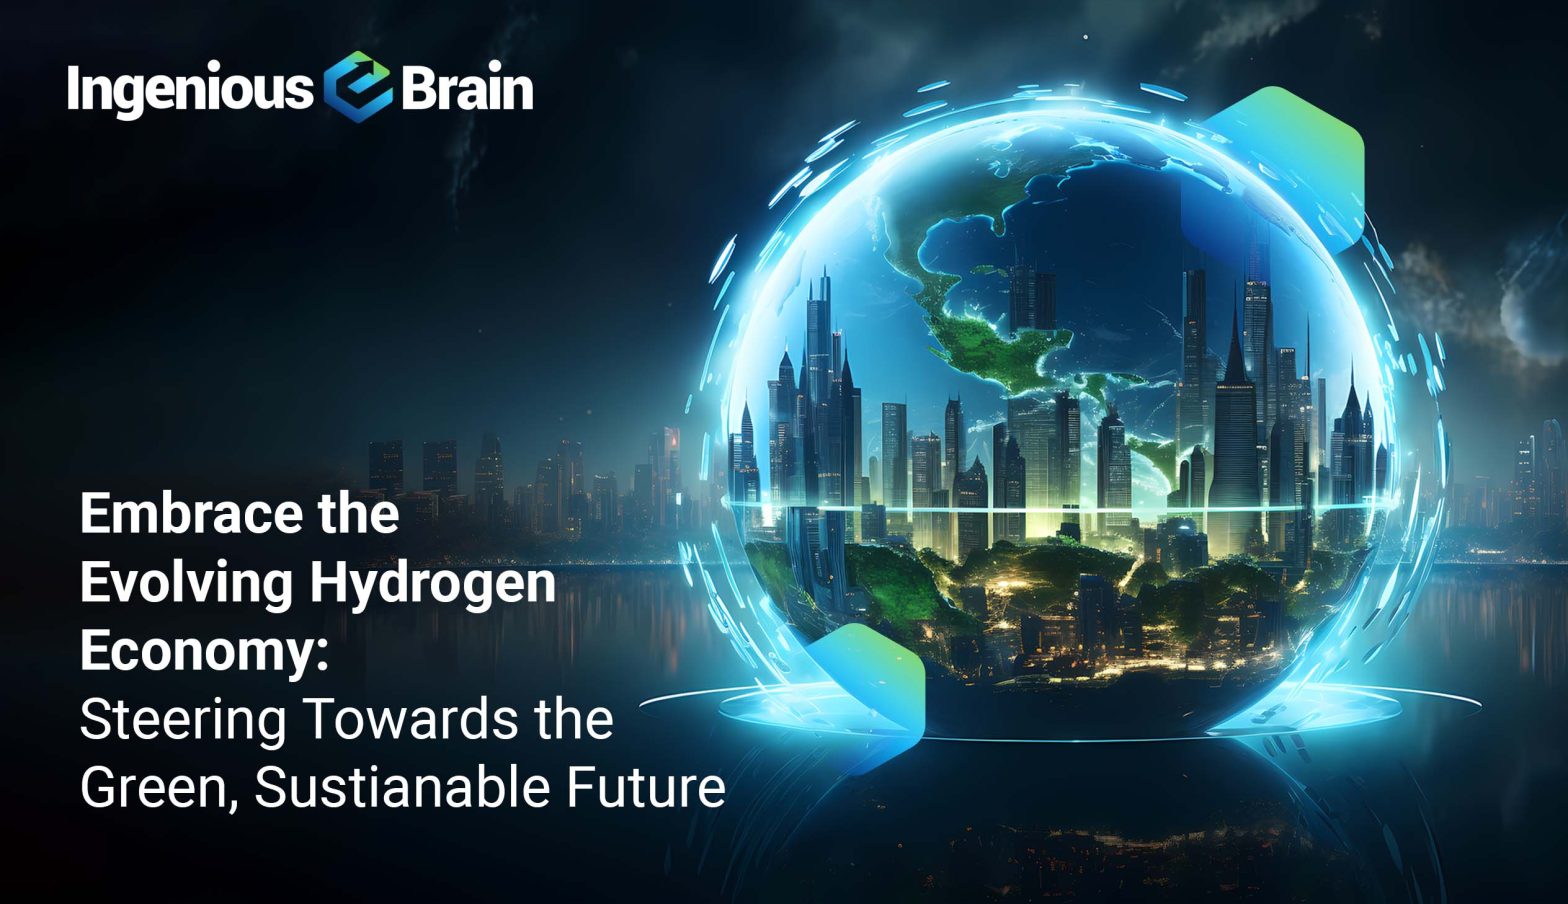 Embrace the Evolving Hydrogen Economy: Steering towards the green, sustainable future